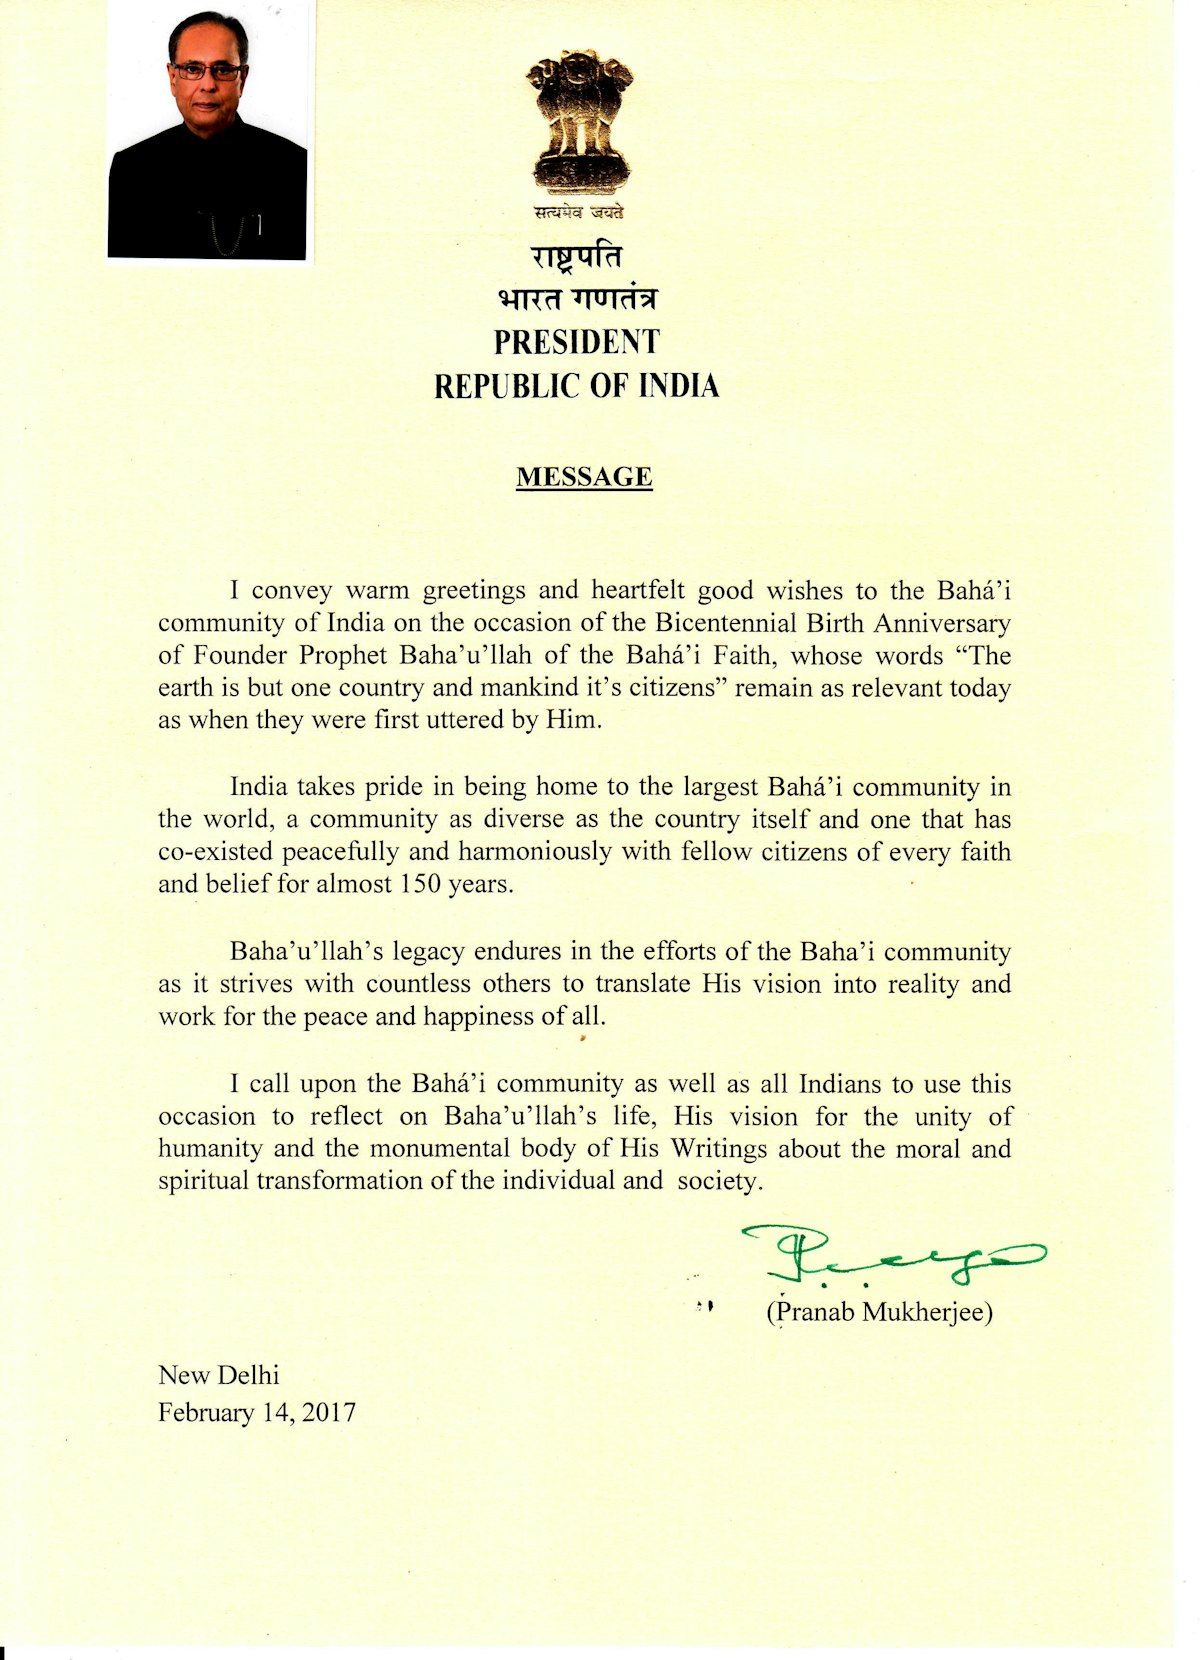 Message of His Excellency Pranab Mukherjee, President of India